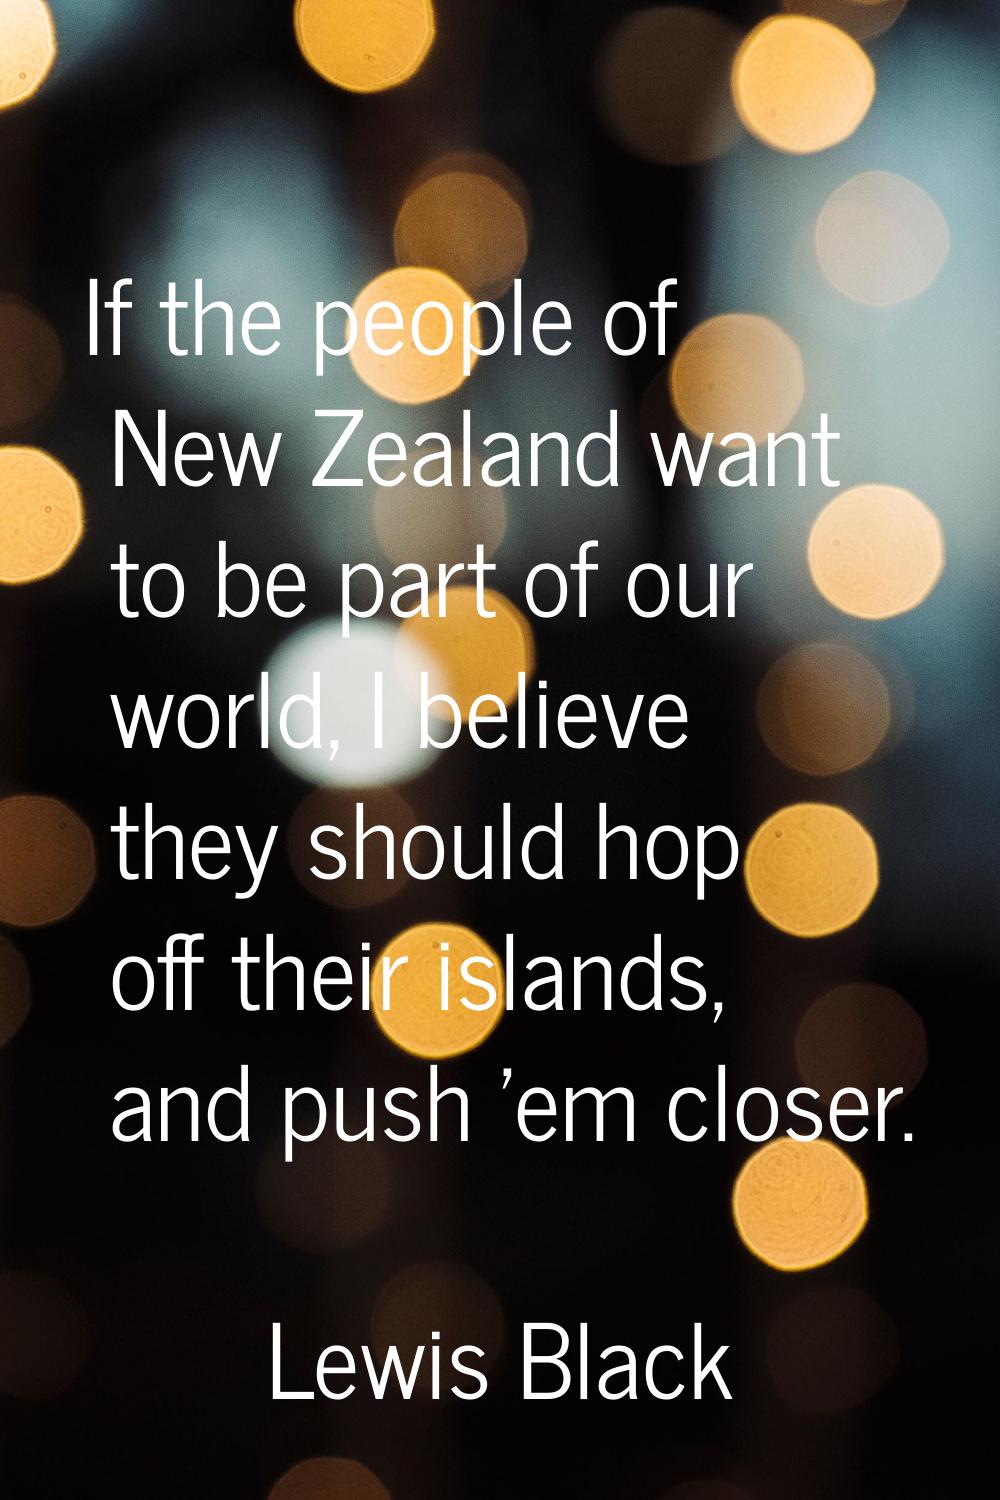 If the people of New Zealand want to be part of our world, I believe they should hop off their isla